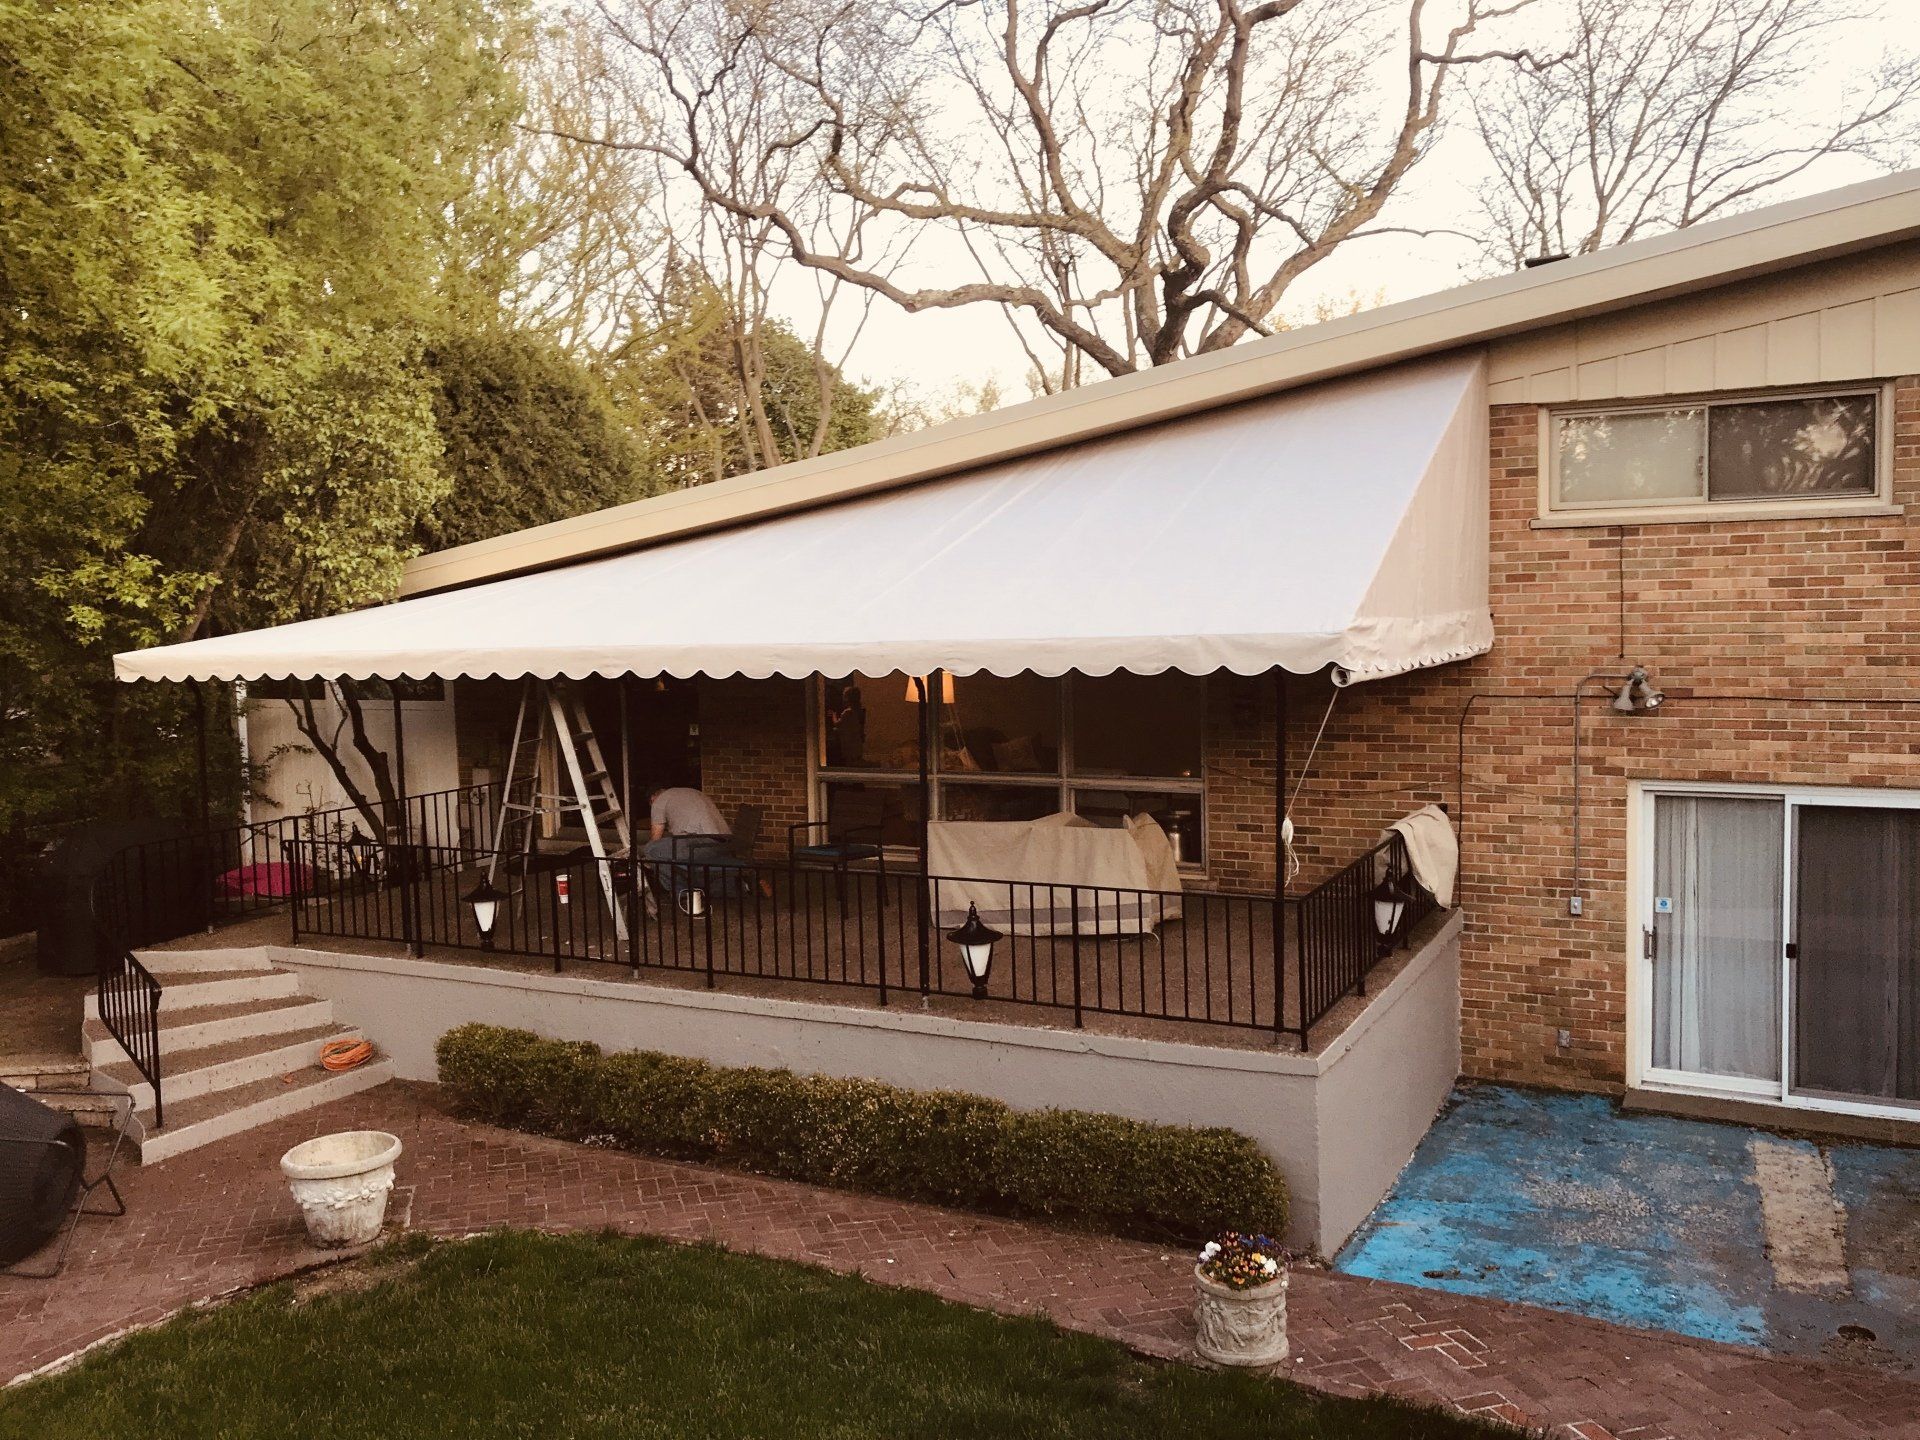 Awnings and Canopies